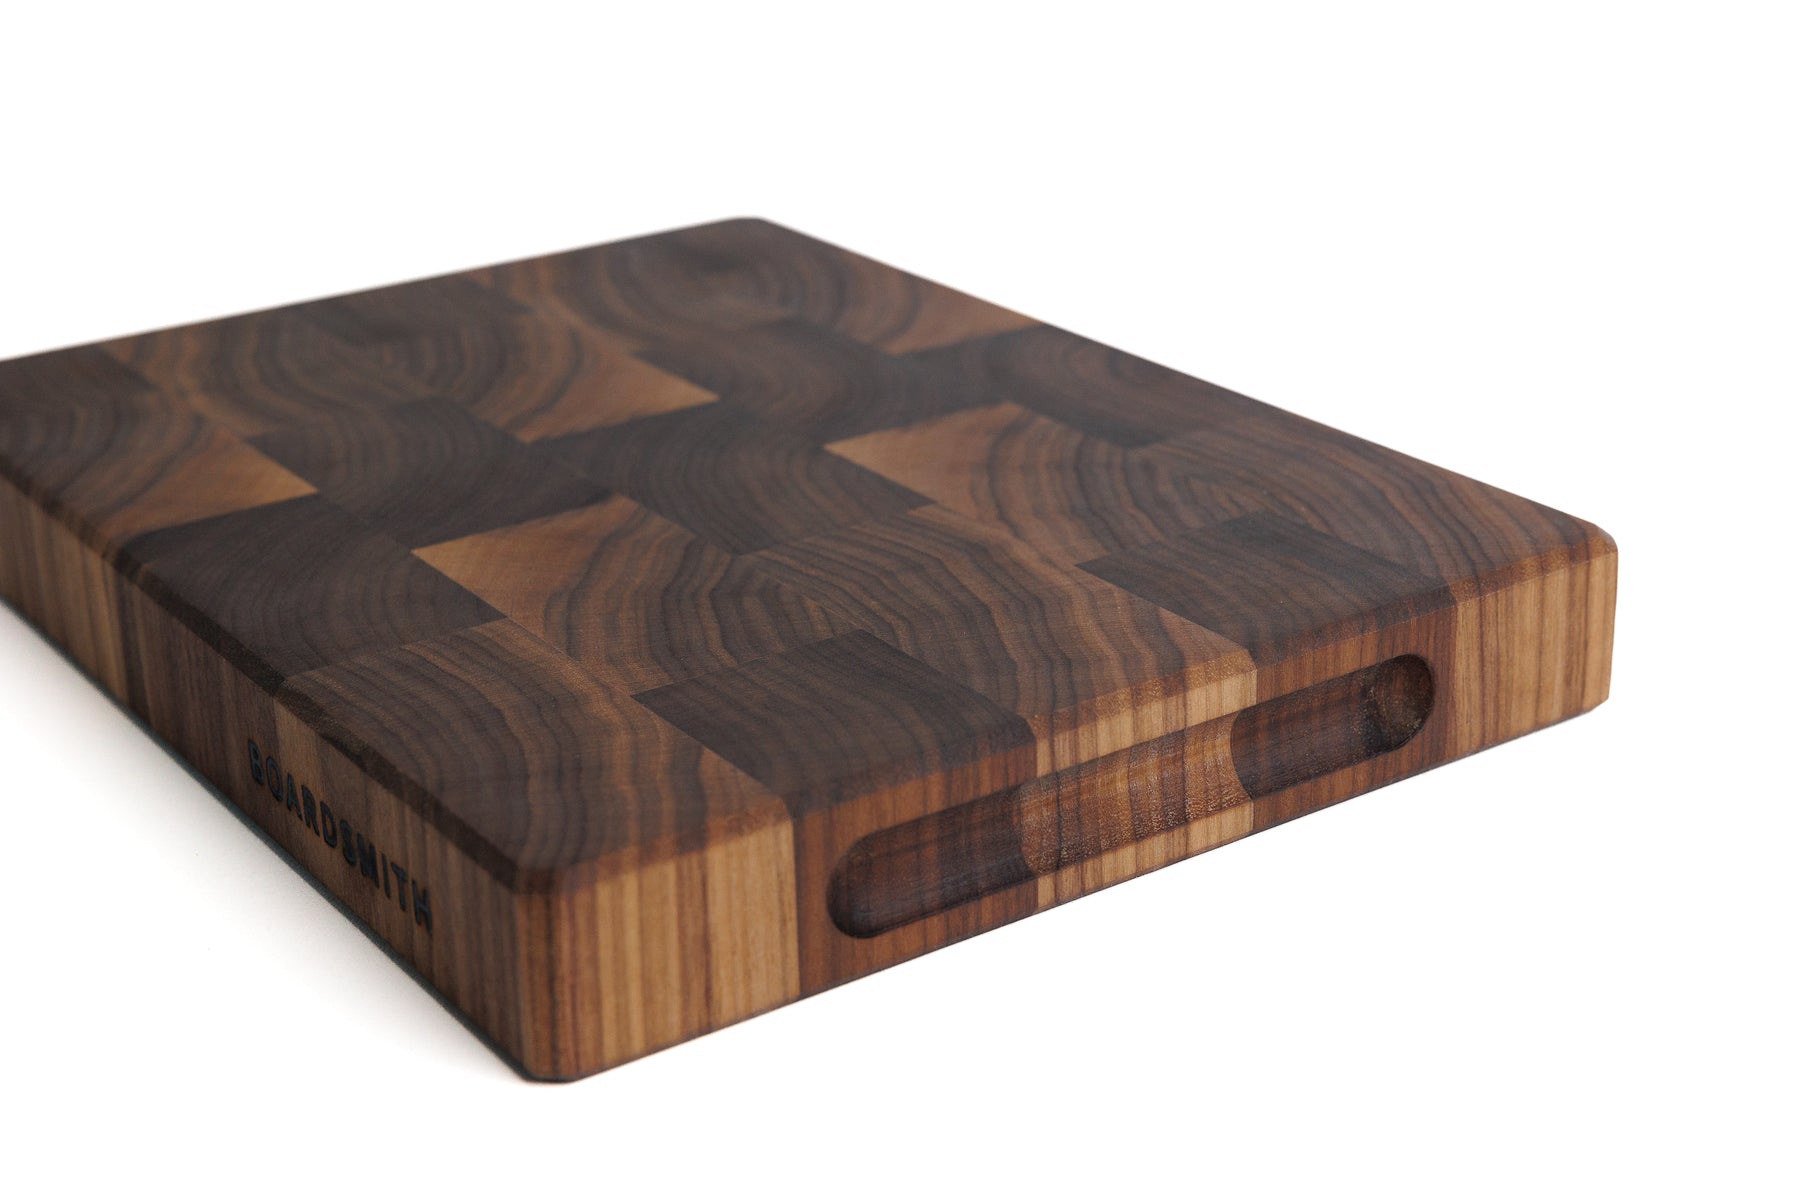  Squirrel Kitchen Cutting Board - Juice Grooves with